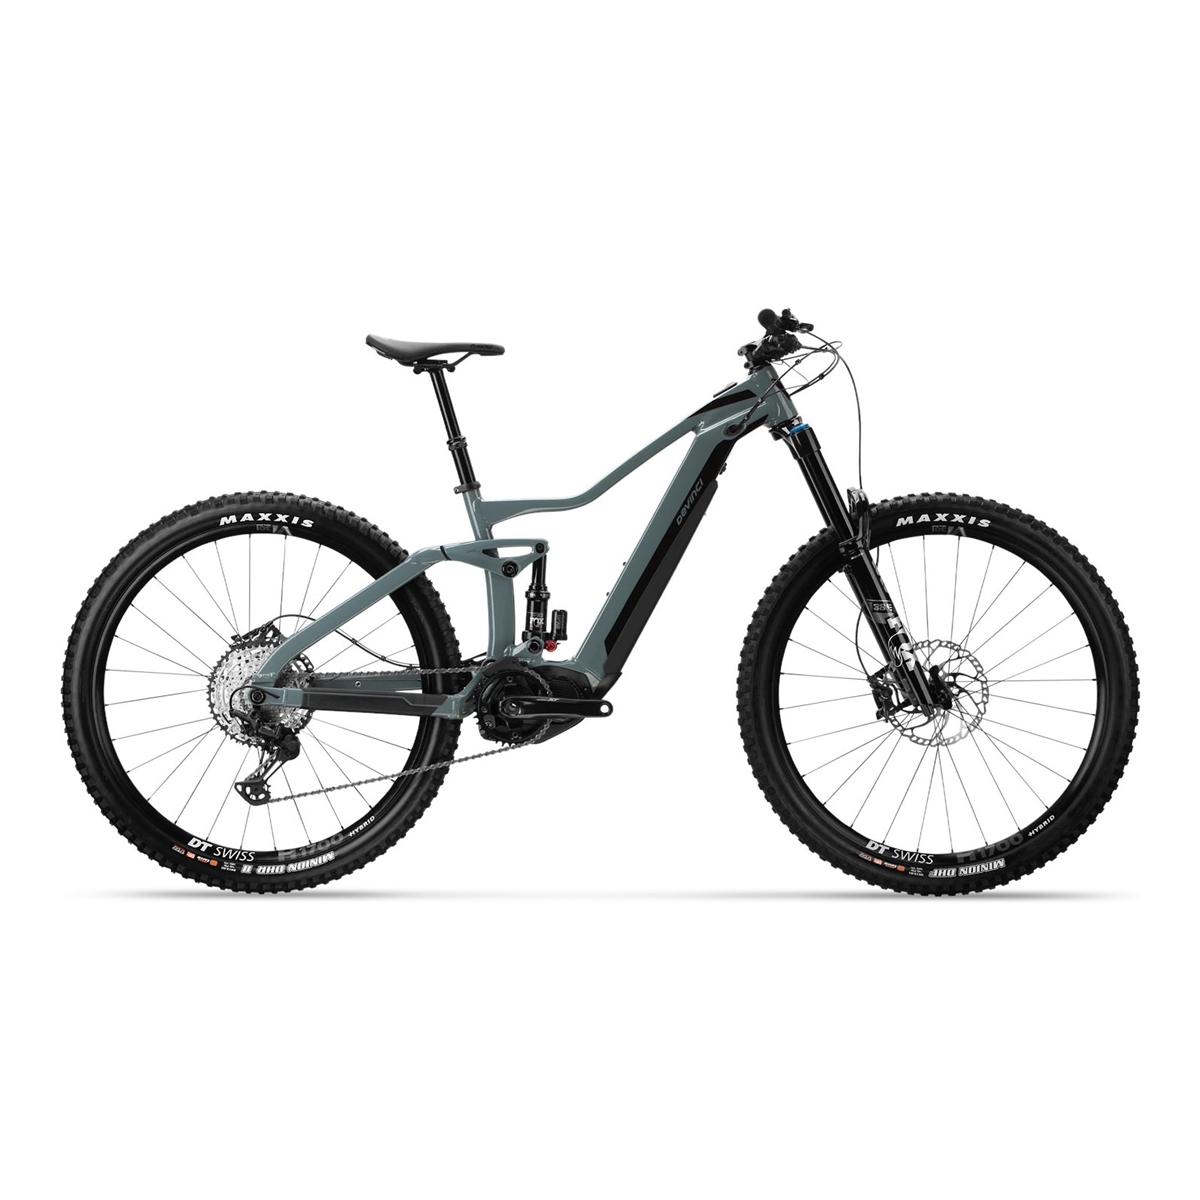 DC XT 29'' 160mm 12s 504Wh Shimano EP8 Charcoal Size L